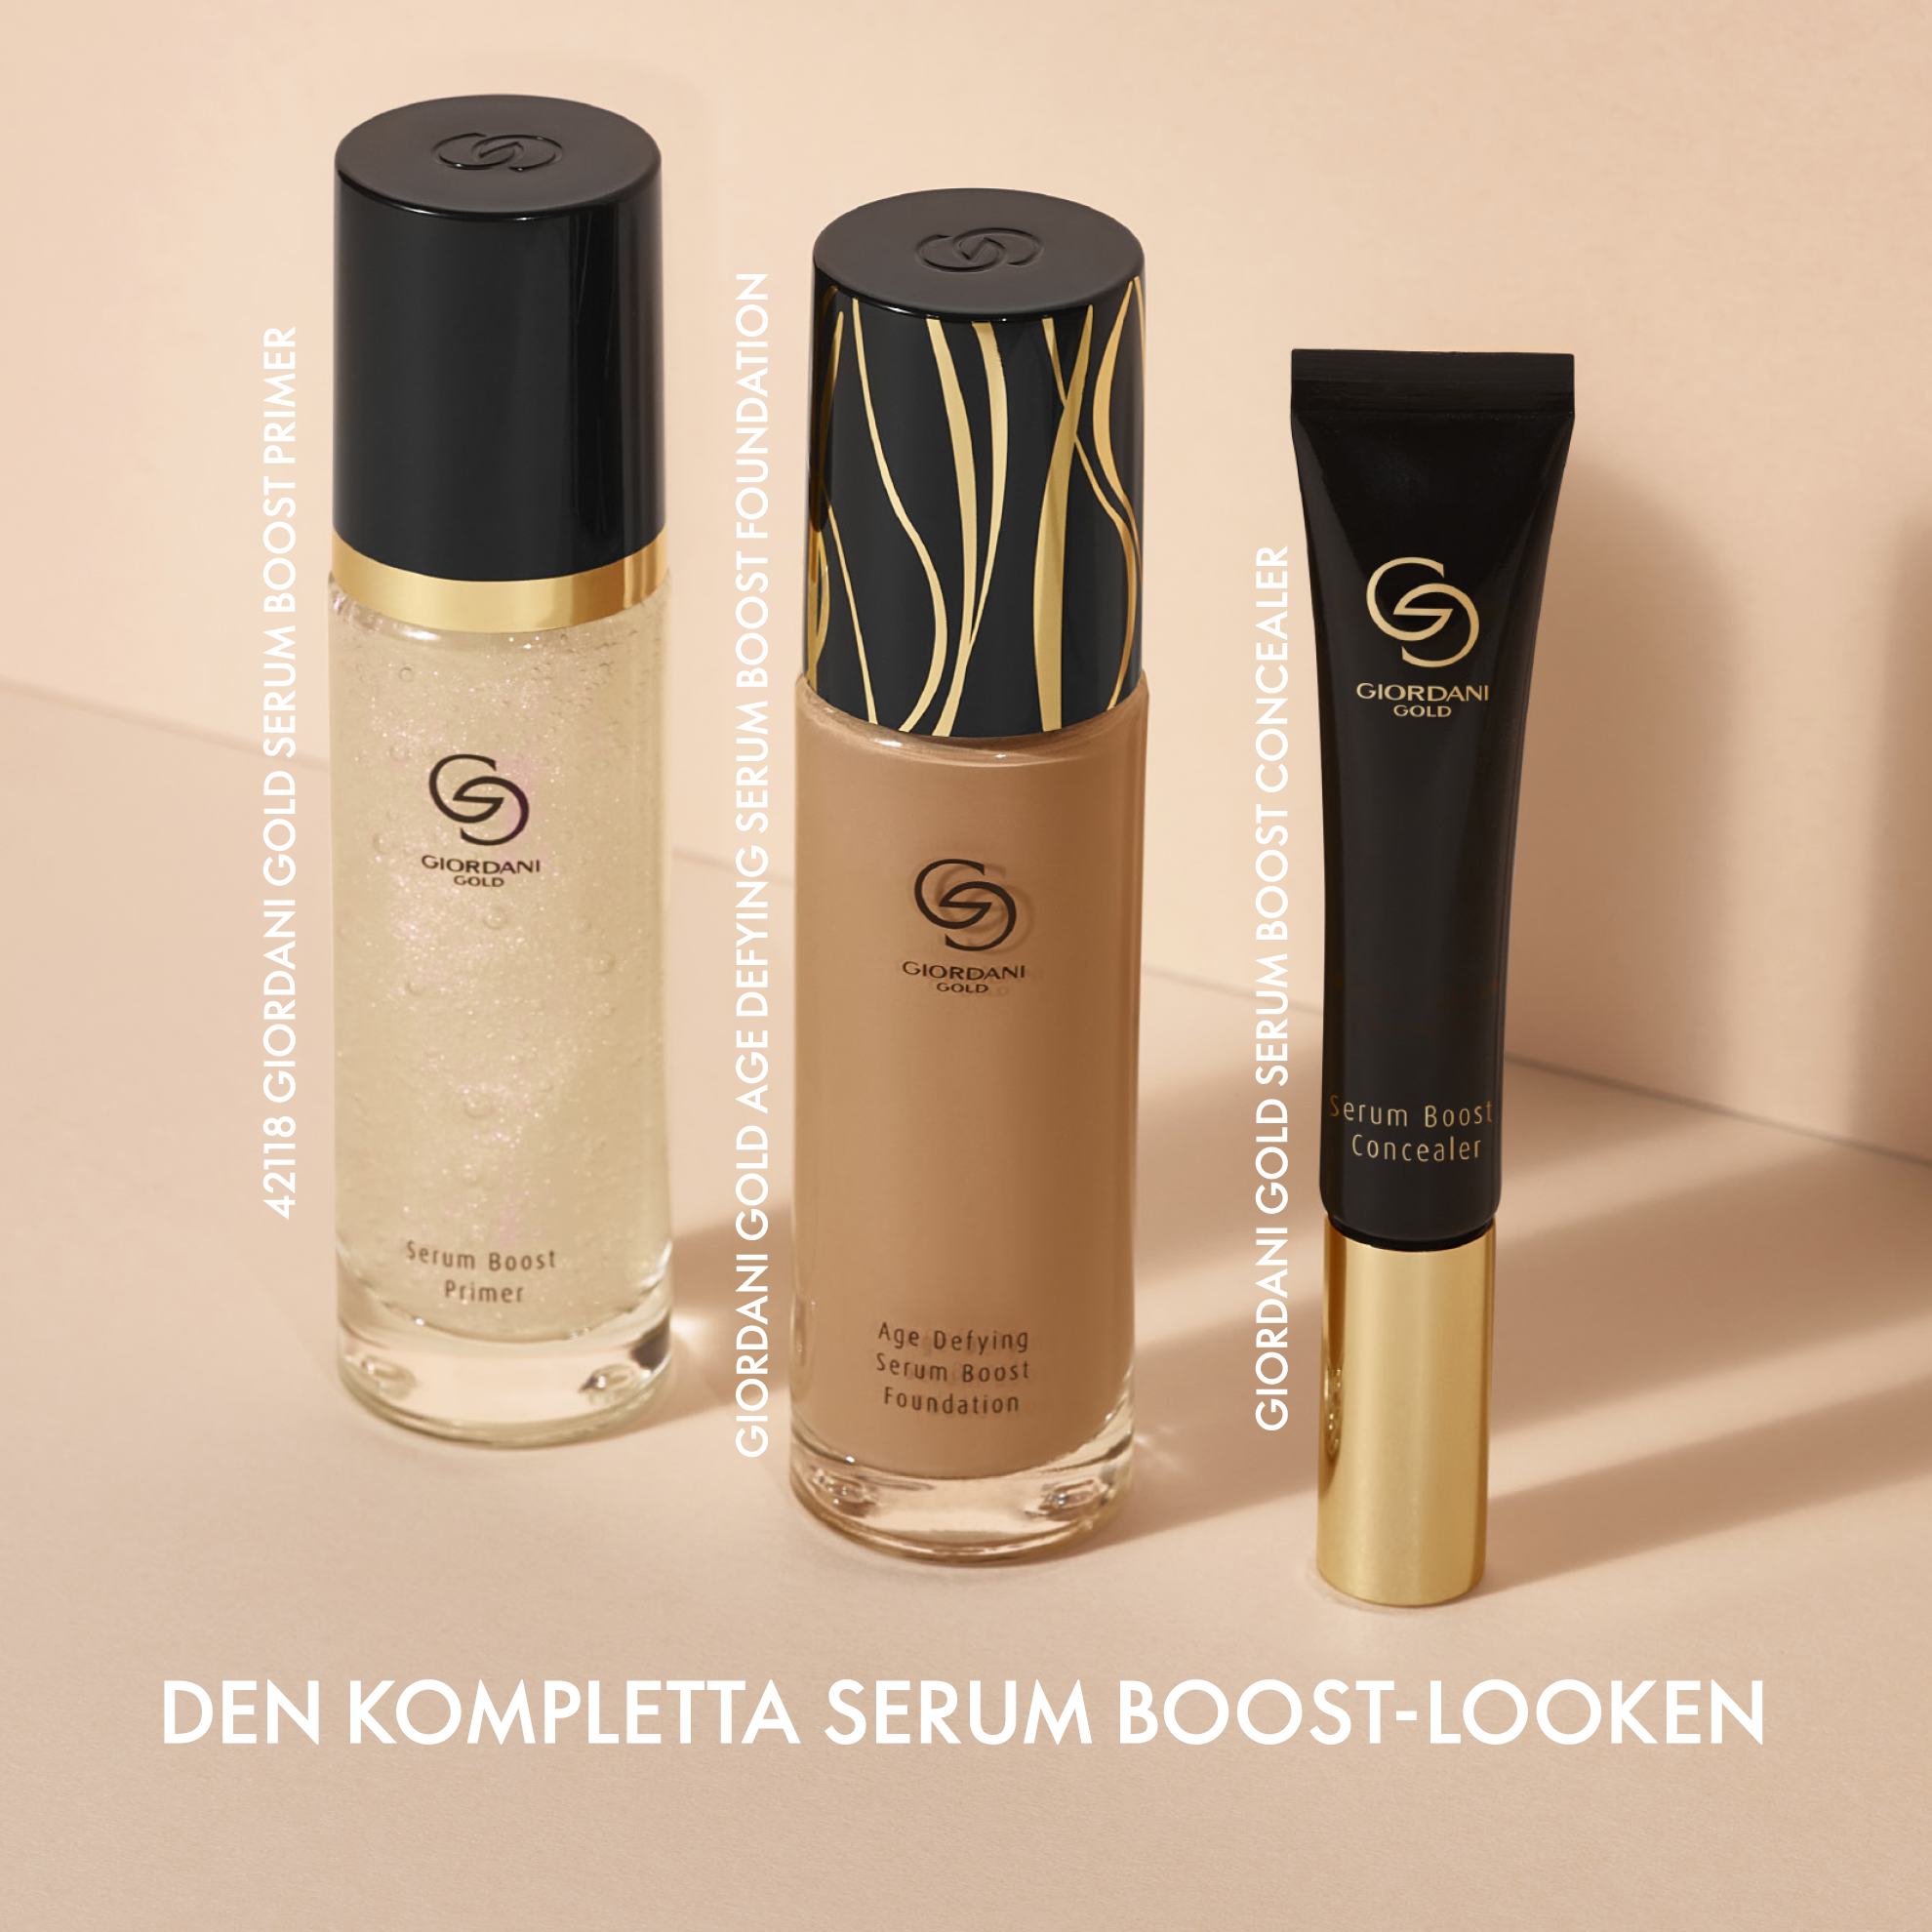 https://media-cdn.oriflame.com/productImage?externalMediaId=product-management-media%2fProducts%2f40954%2fSE%2f40954_7.png&id=16889088&version=1